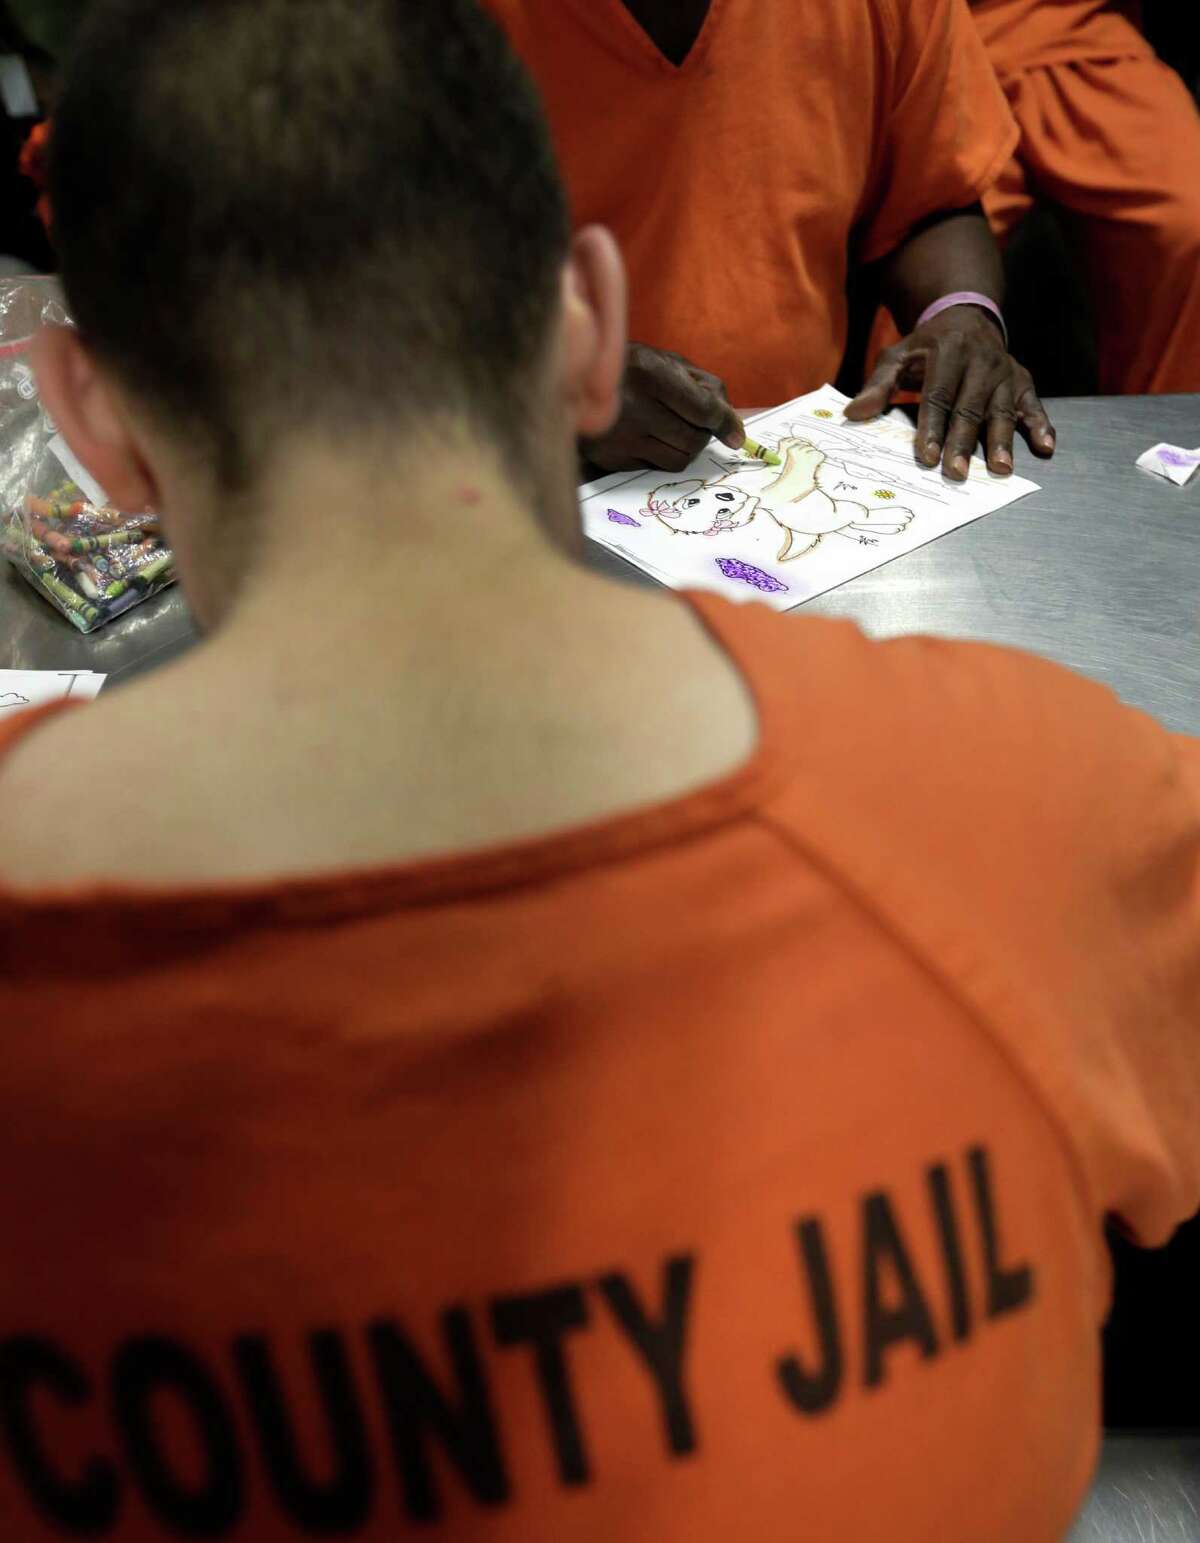 Inmates take part in a group therapy session in an acute unit of the mental heath unit at the Harris County Jail, Friday, Aug. 15, 2014, in Houston. (AP Photo/Eric Gay)